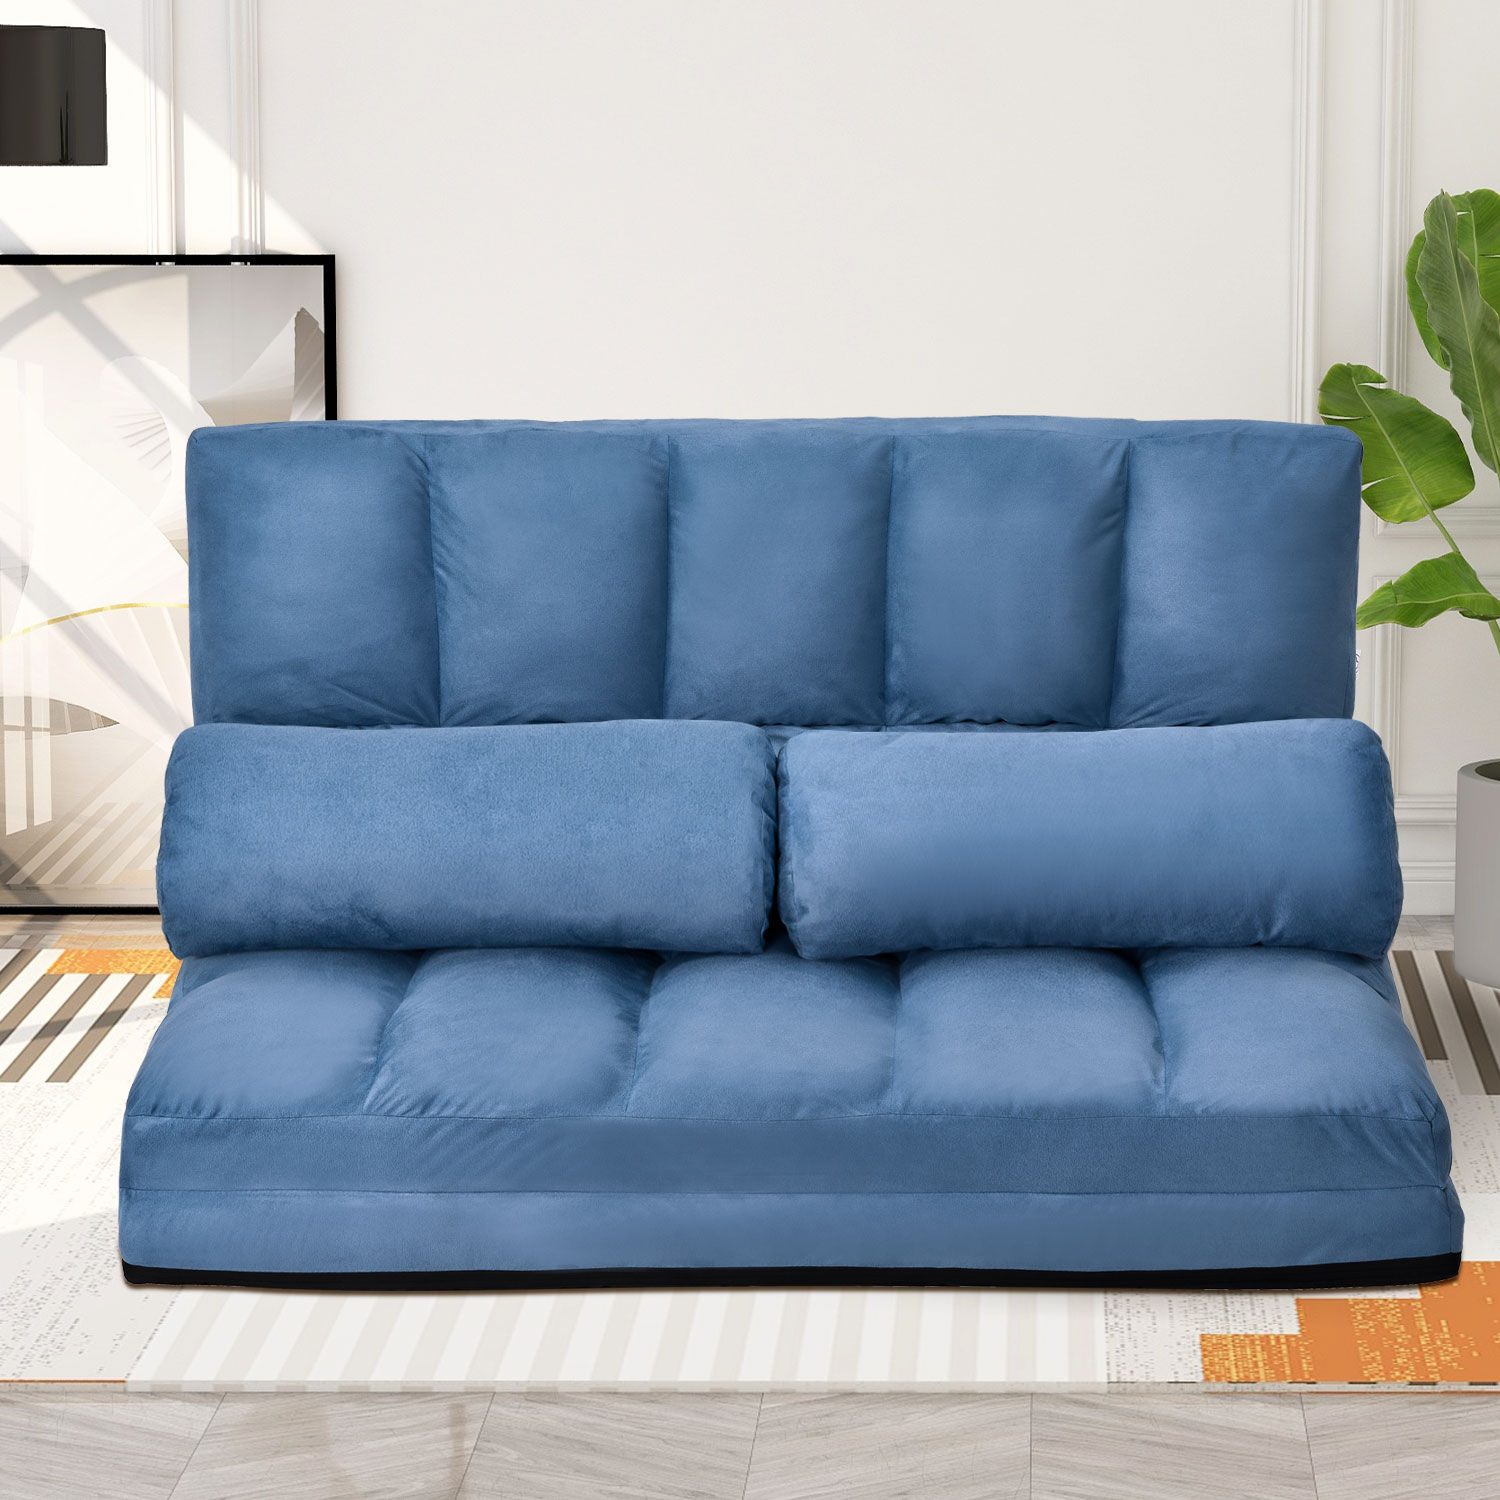 Double Chaise Lounge Sofa With Two Pillows - PP195418AAC